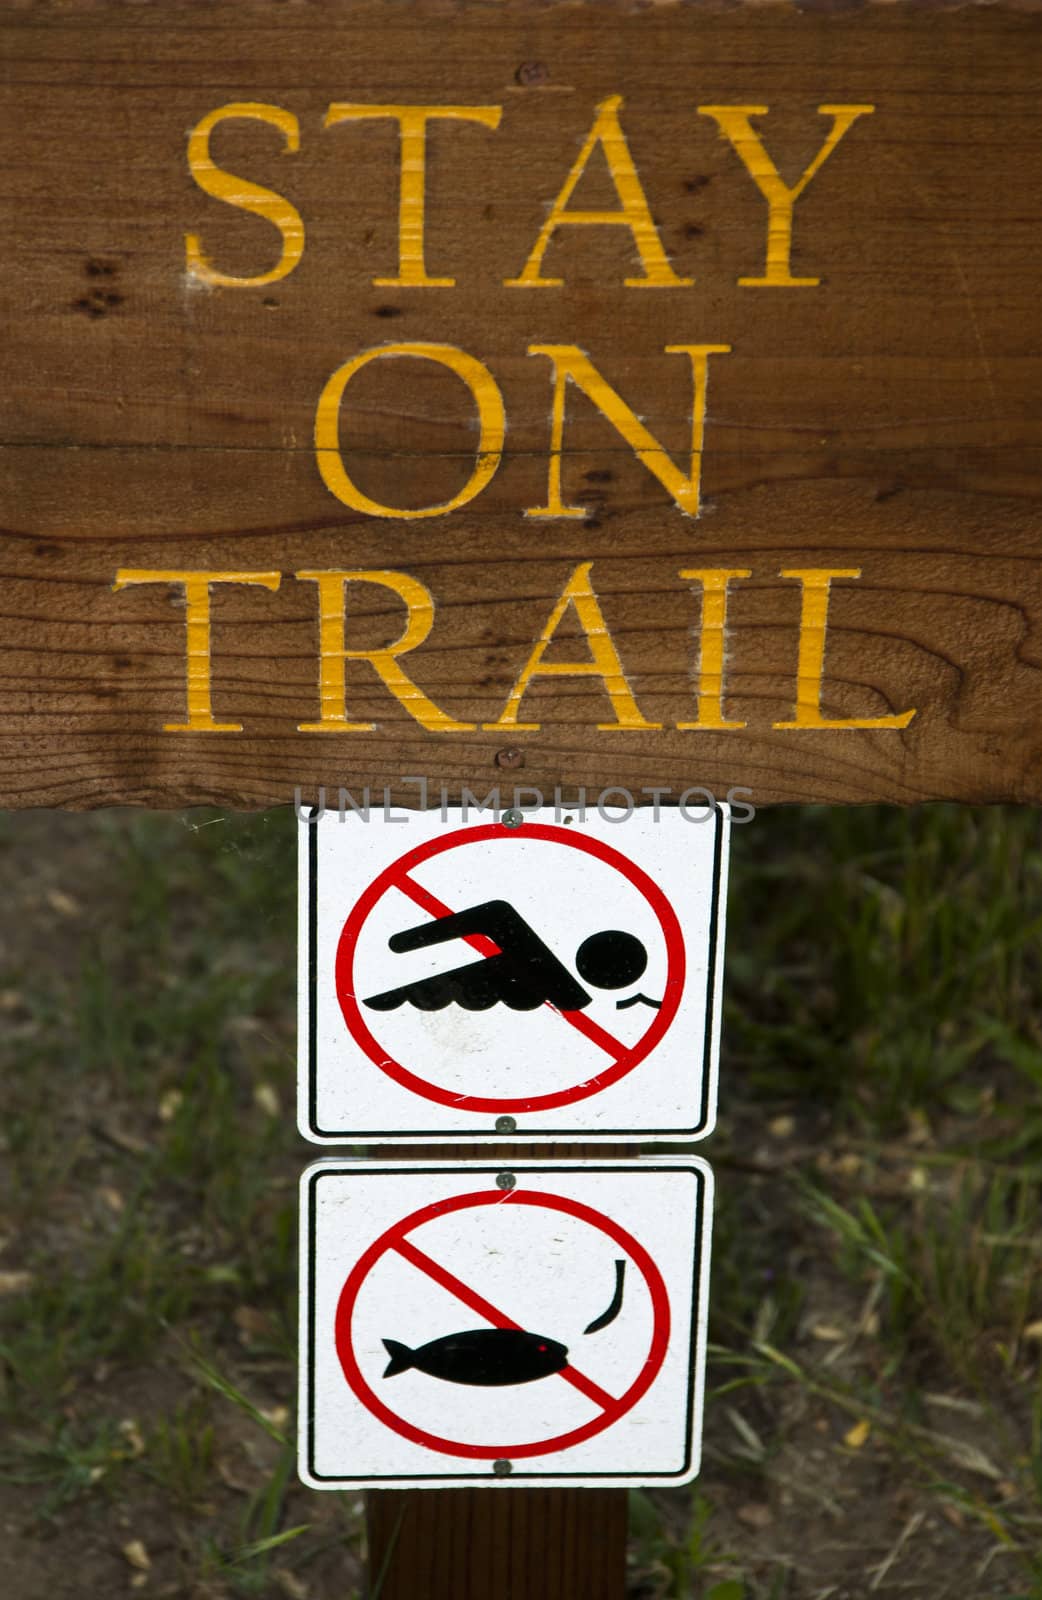 Stay on trail sign